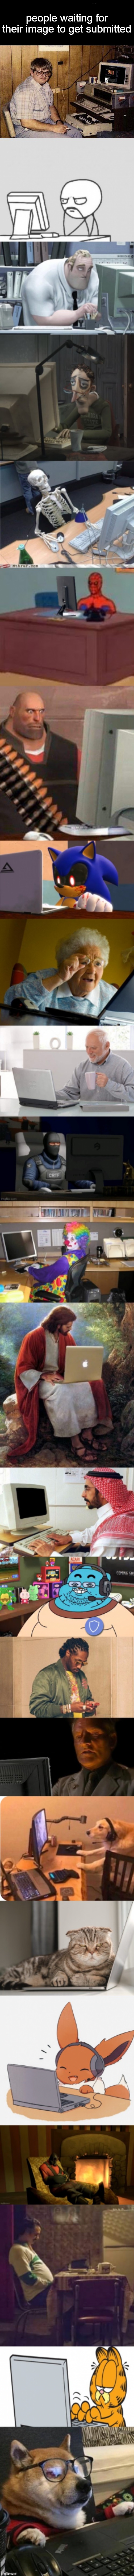 people waiting for their image to get submitted | image tagged in dead stream users waiting | made w/ Imgflip meme maker